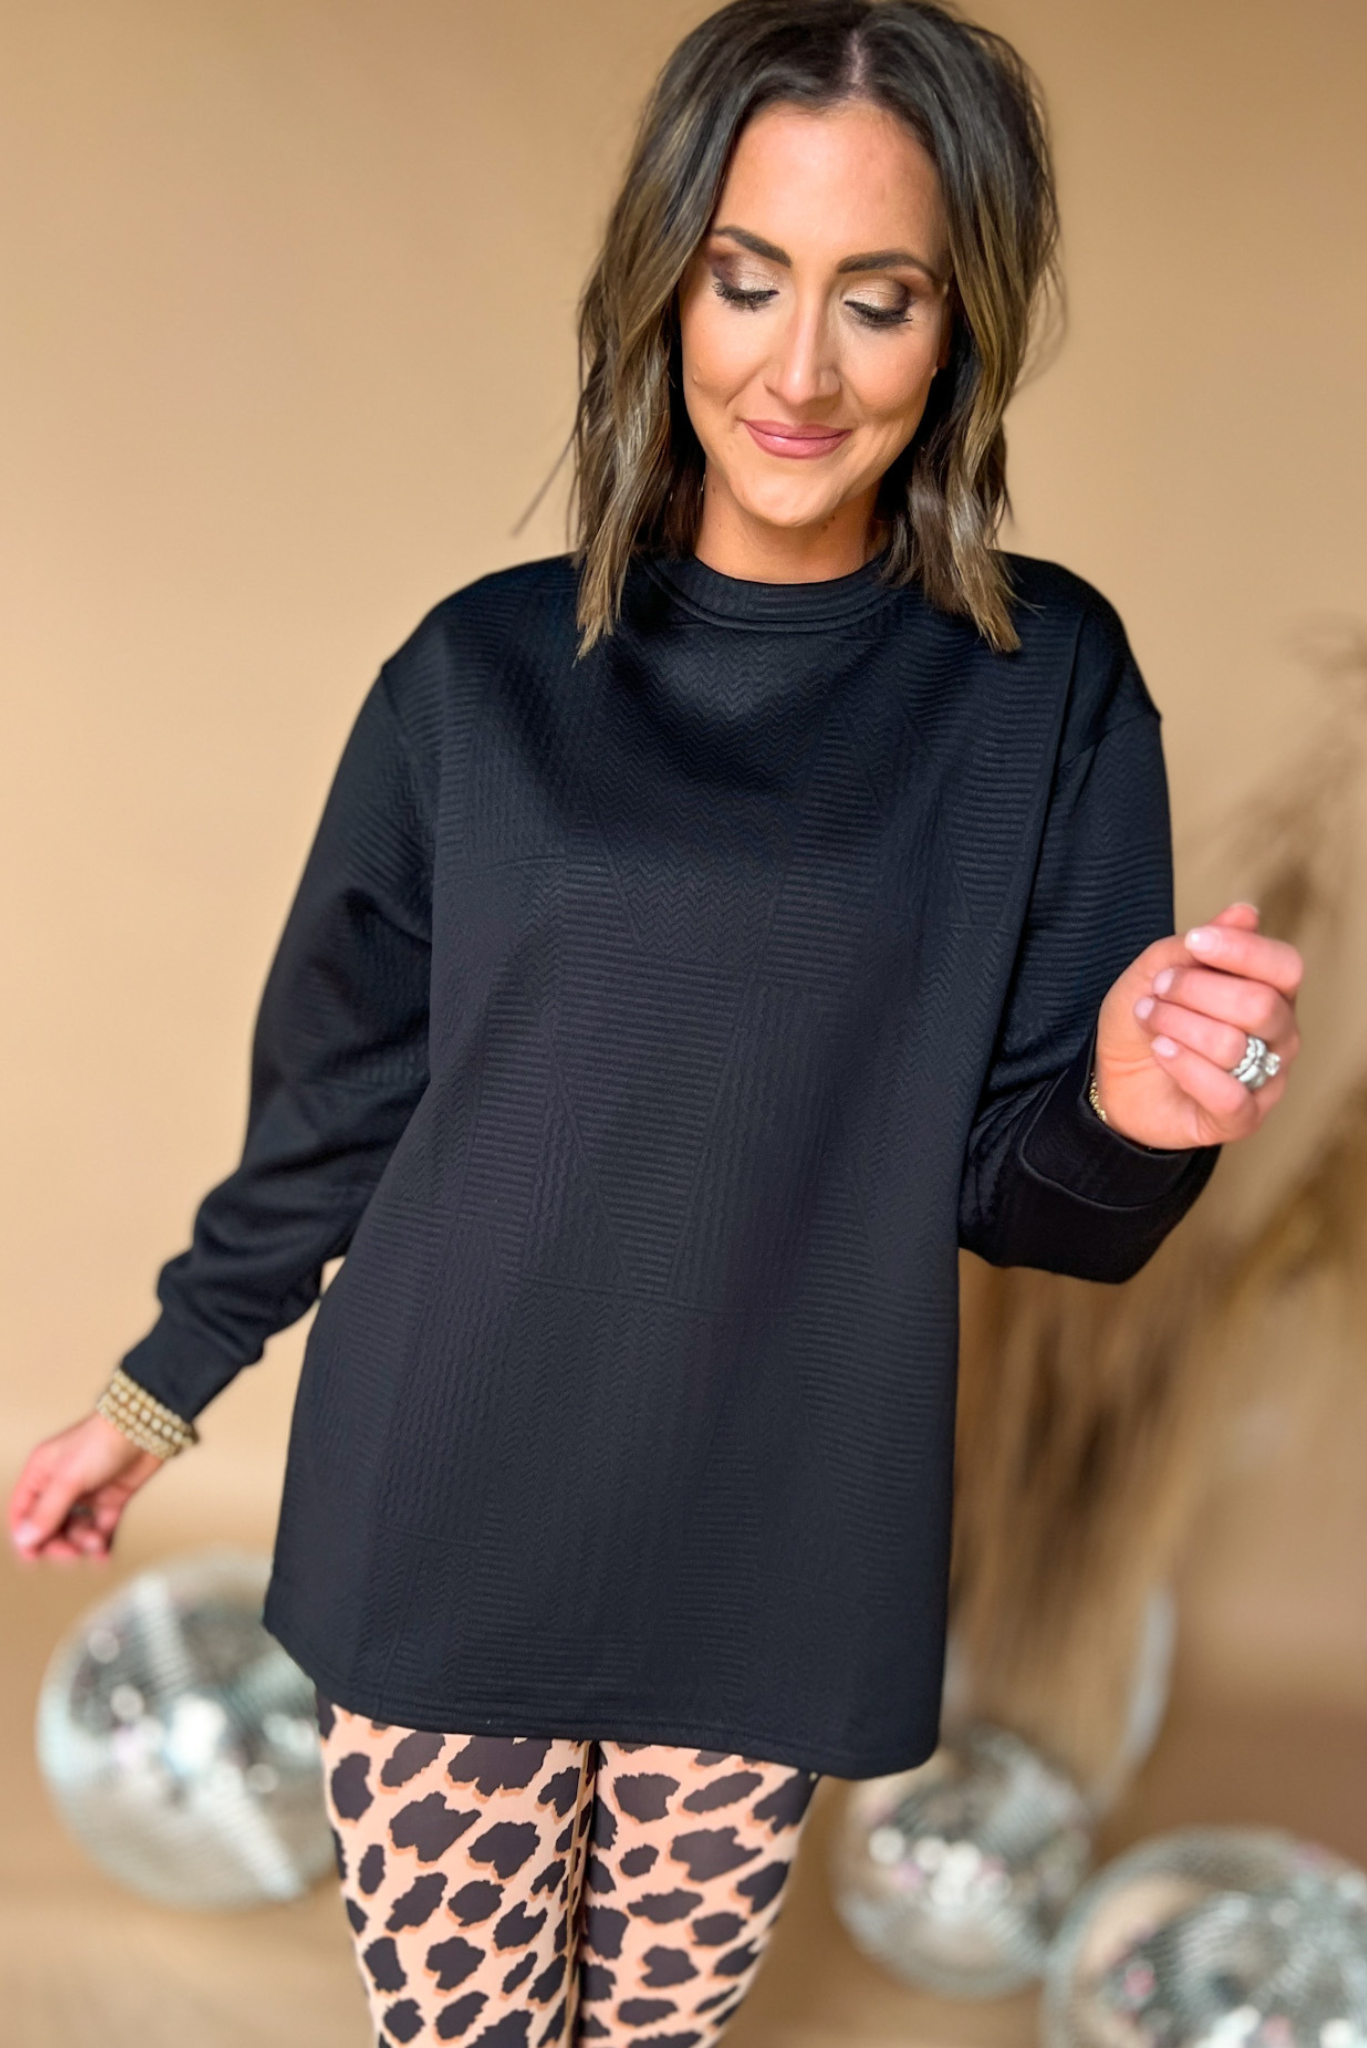 SSYS Black Quilted Long Sleeve High Low Top